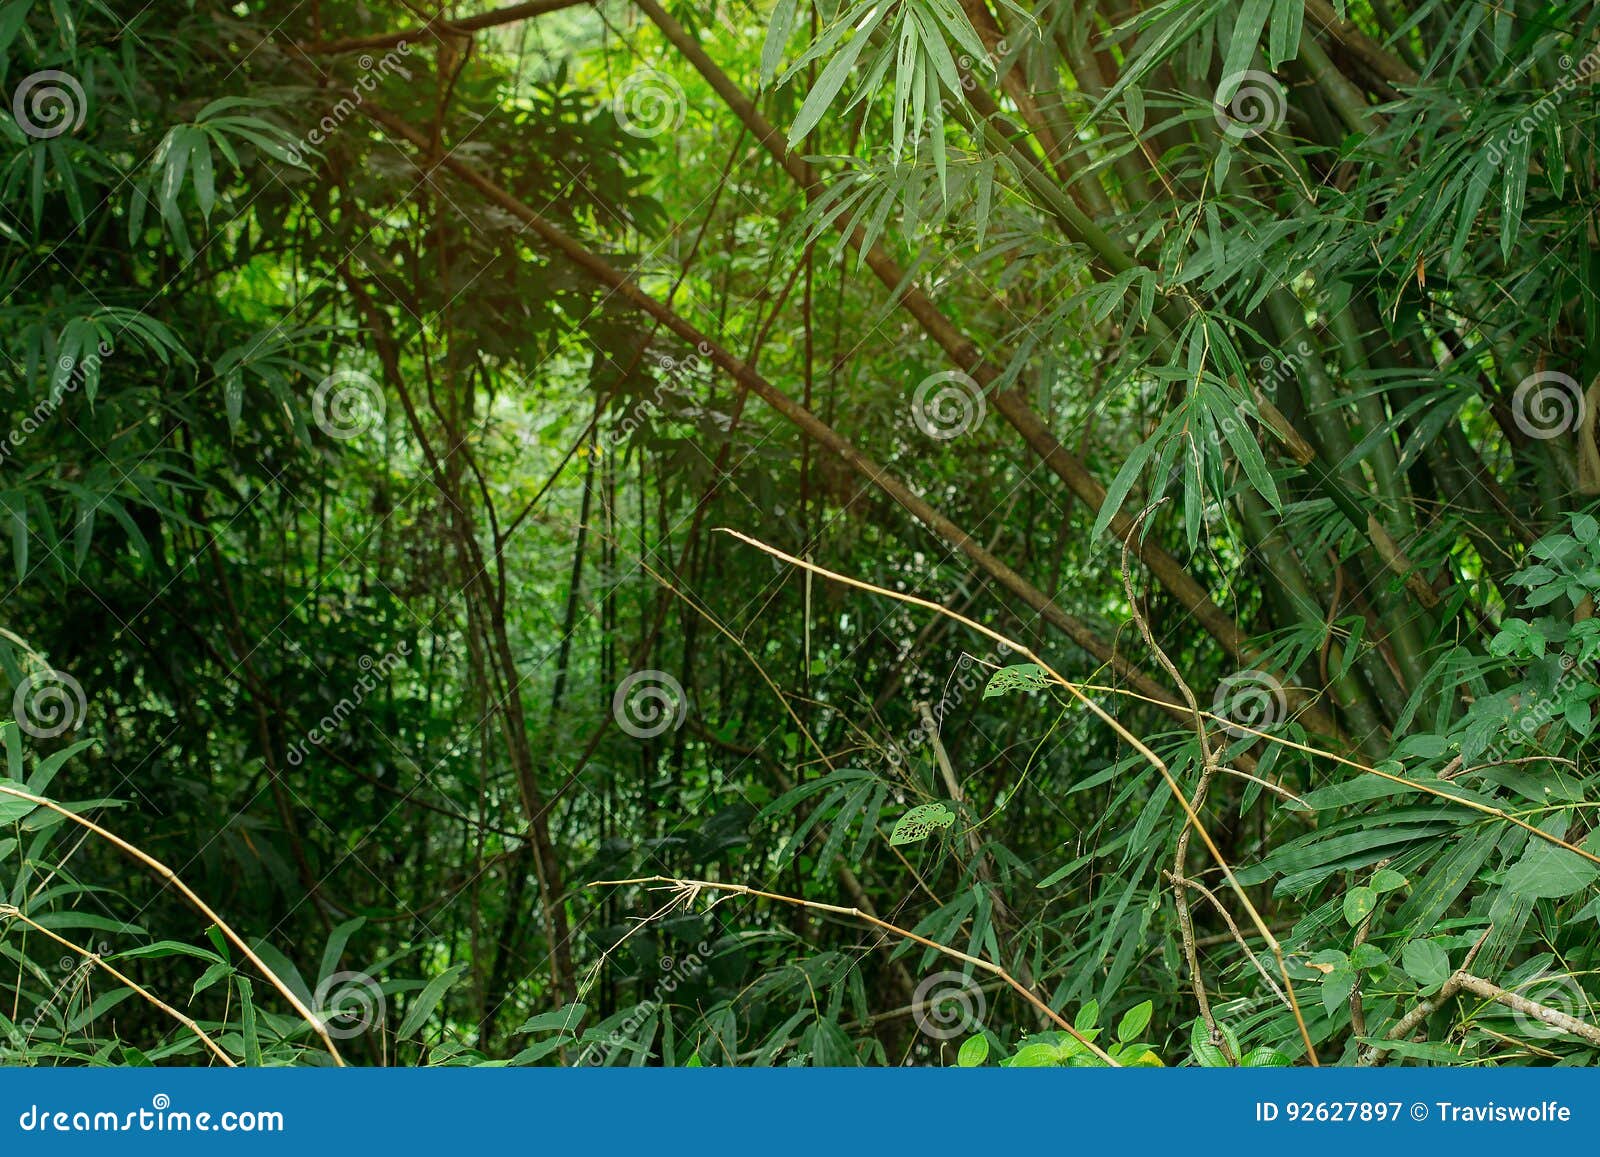 jungle greenery with copy space area and warm humid airy sunlight flowing in from the top. fresh air and green tropical trees and